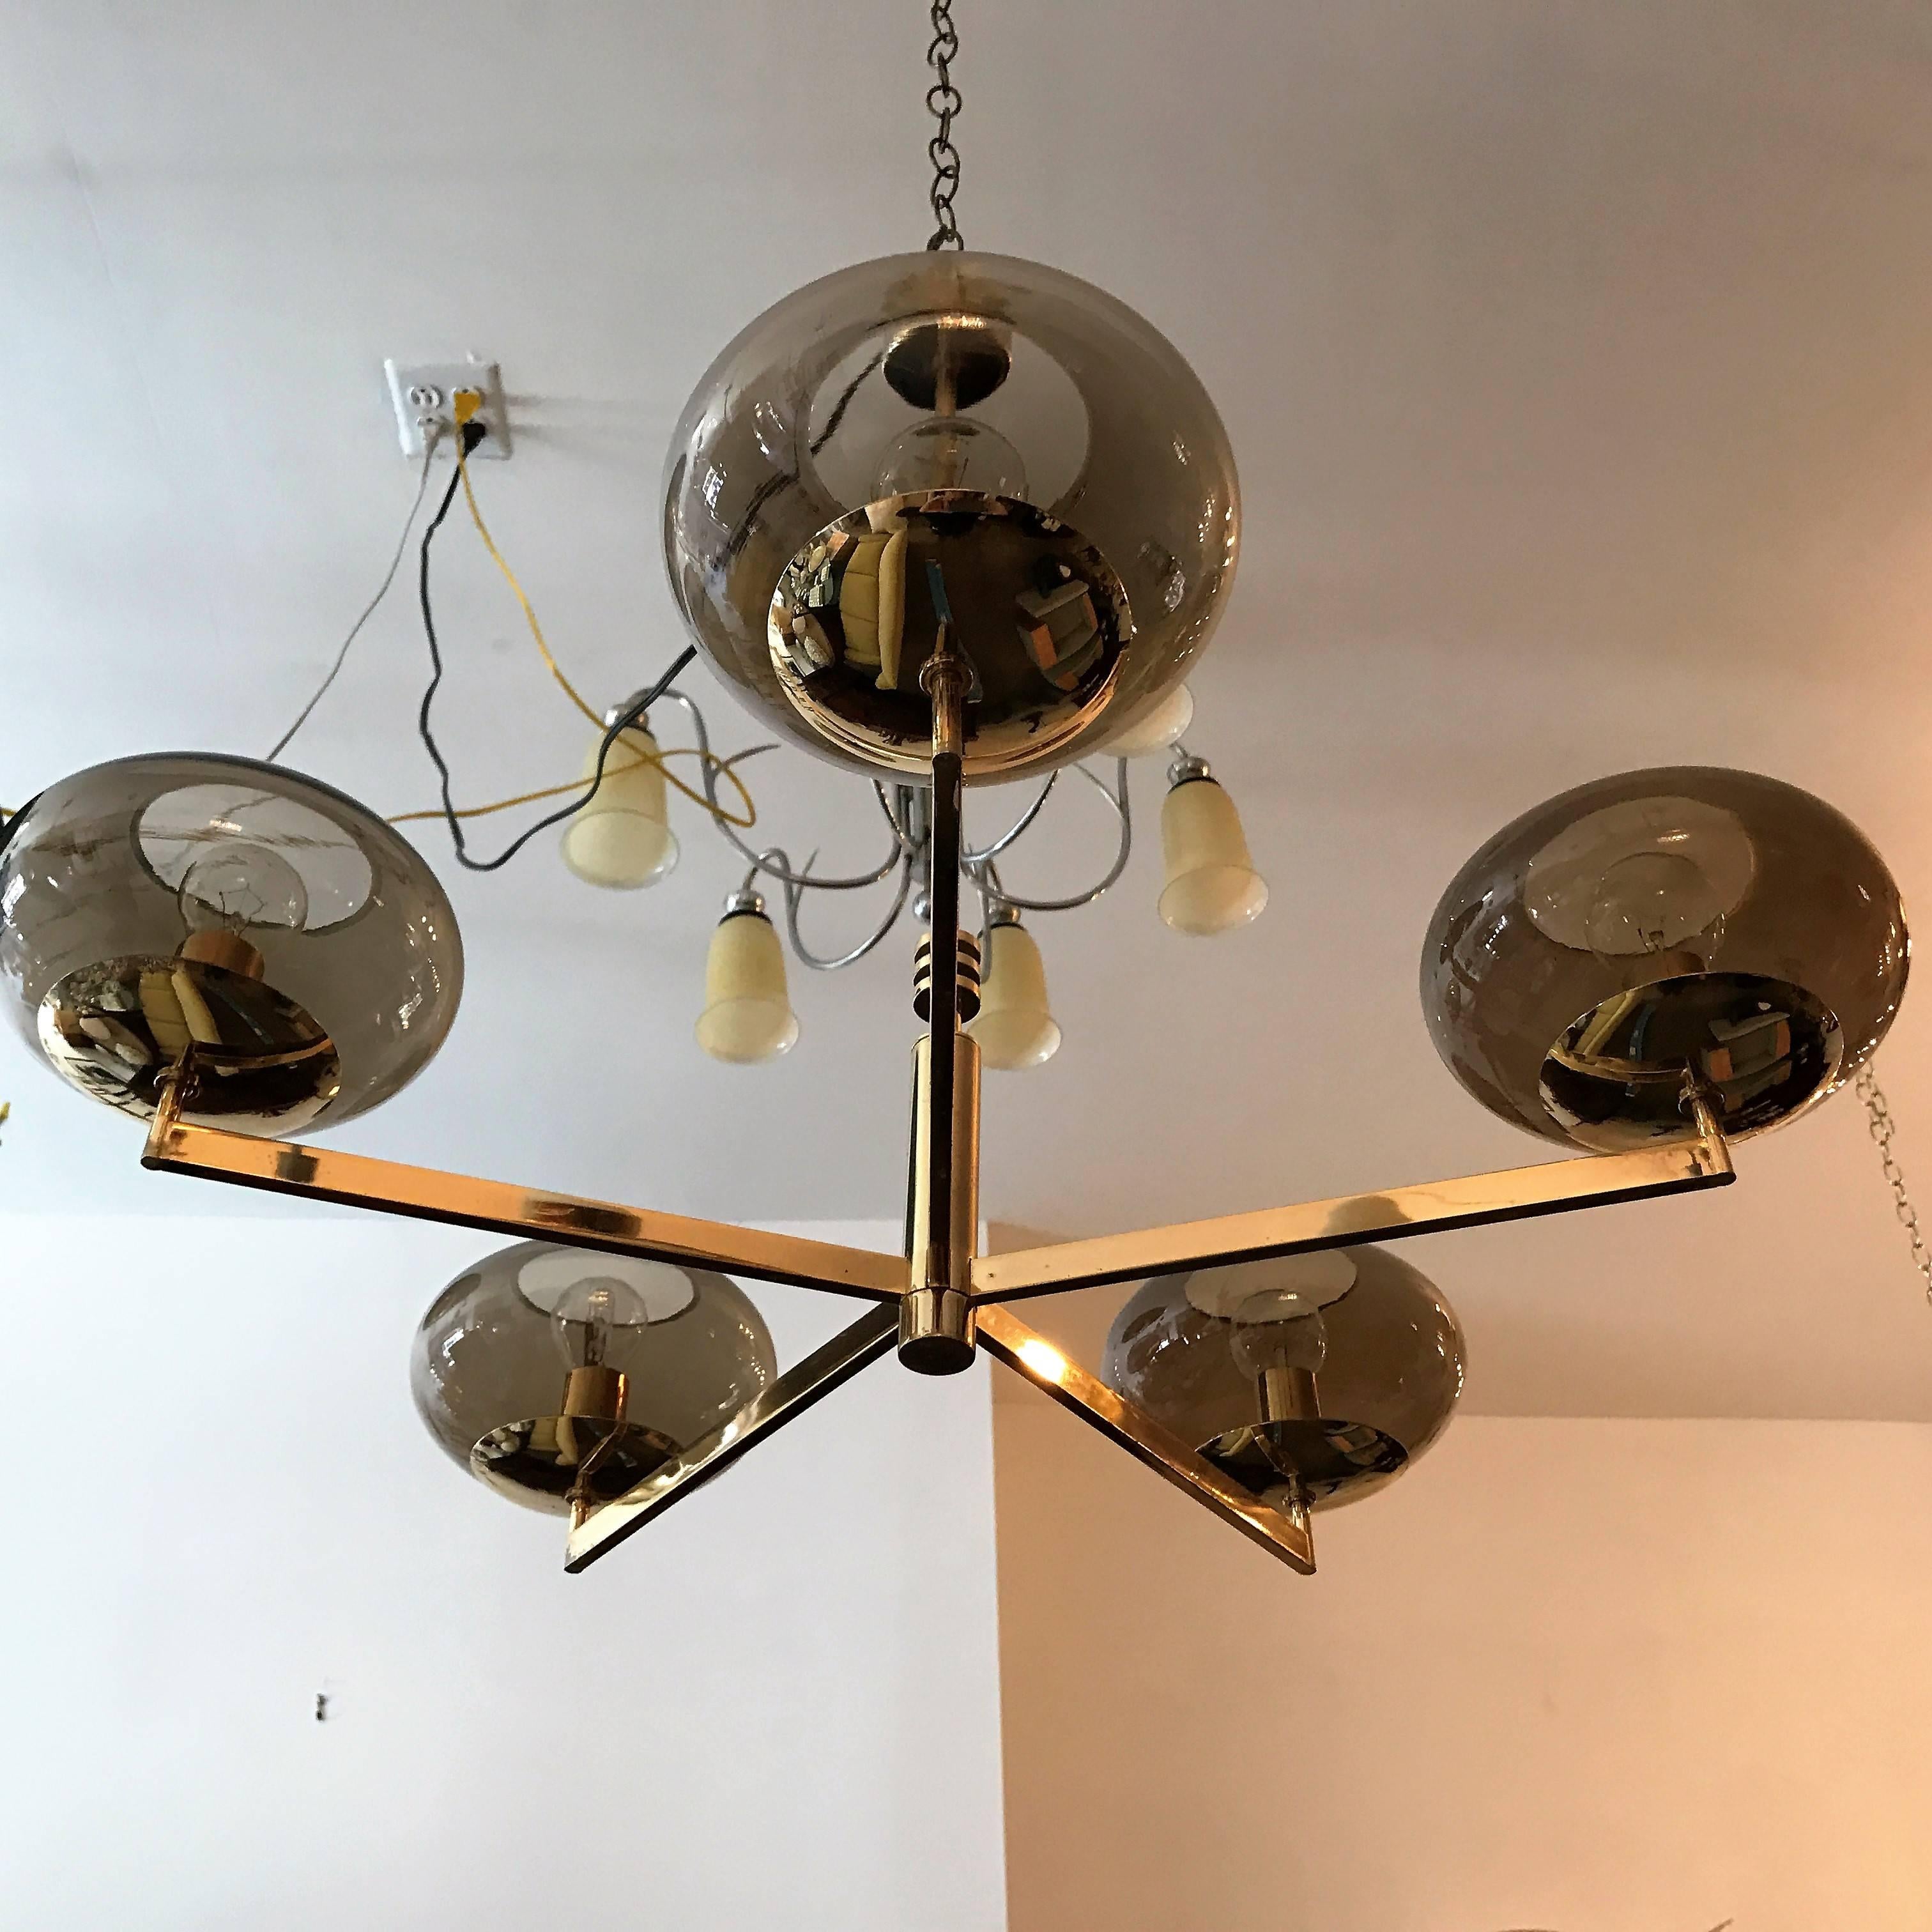 A great sleek 1970s modern five-light pendant composed of a polished brass frame and smoked glass globe shades by the famed Italian lighting company, Sciolari . Rewired. Matching one arm and sconces. Matching three-light pendant also available.